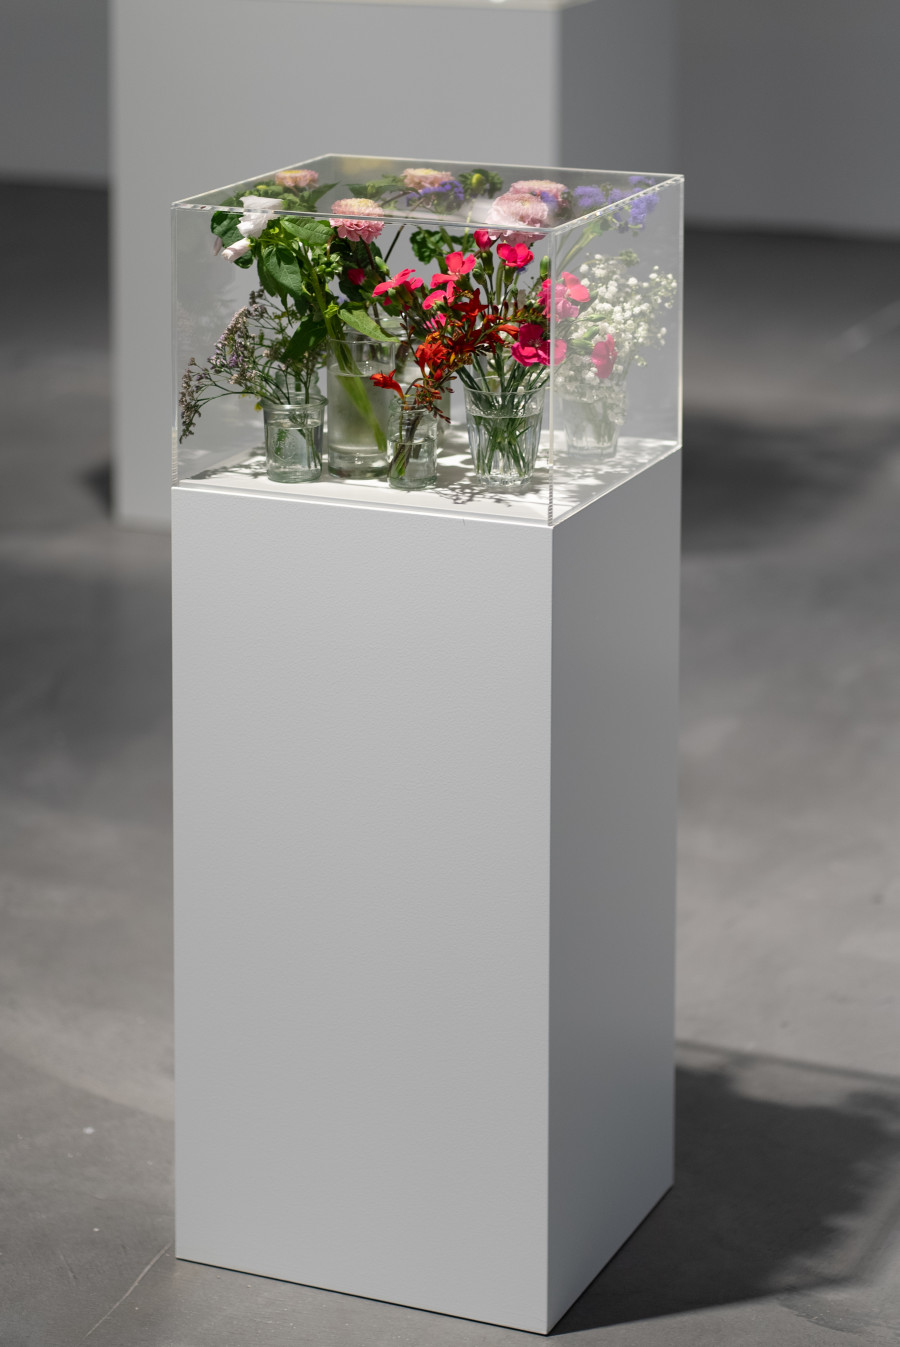 Exhibition view Interdependencies: Perspectives on Care and Resilience, Jesse Darling, Untitled (still life), 2018 - ongoing, Flowers, vases, water, vitrines. Courtesy the artist and Arcadia Missa, London. Photo: Studio Stucky